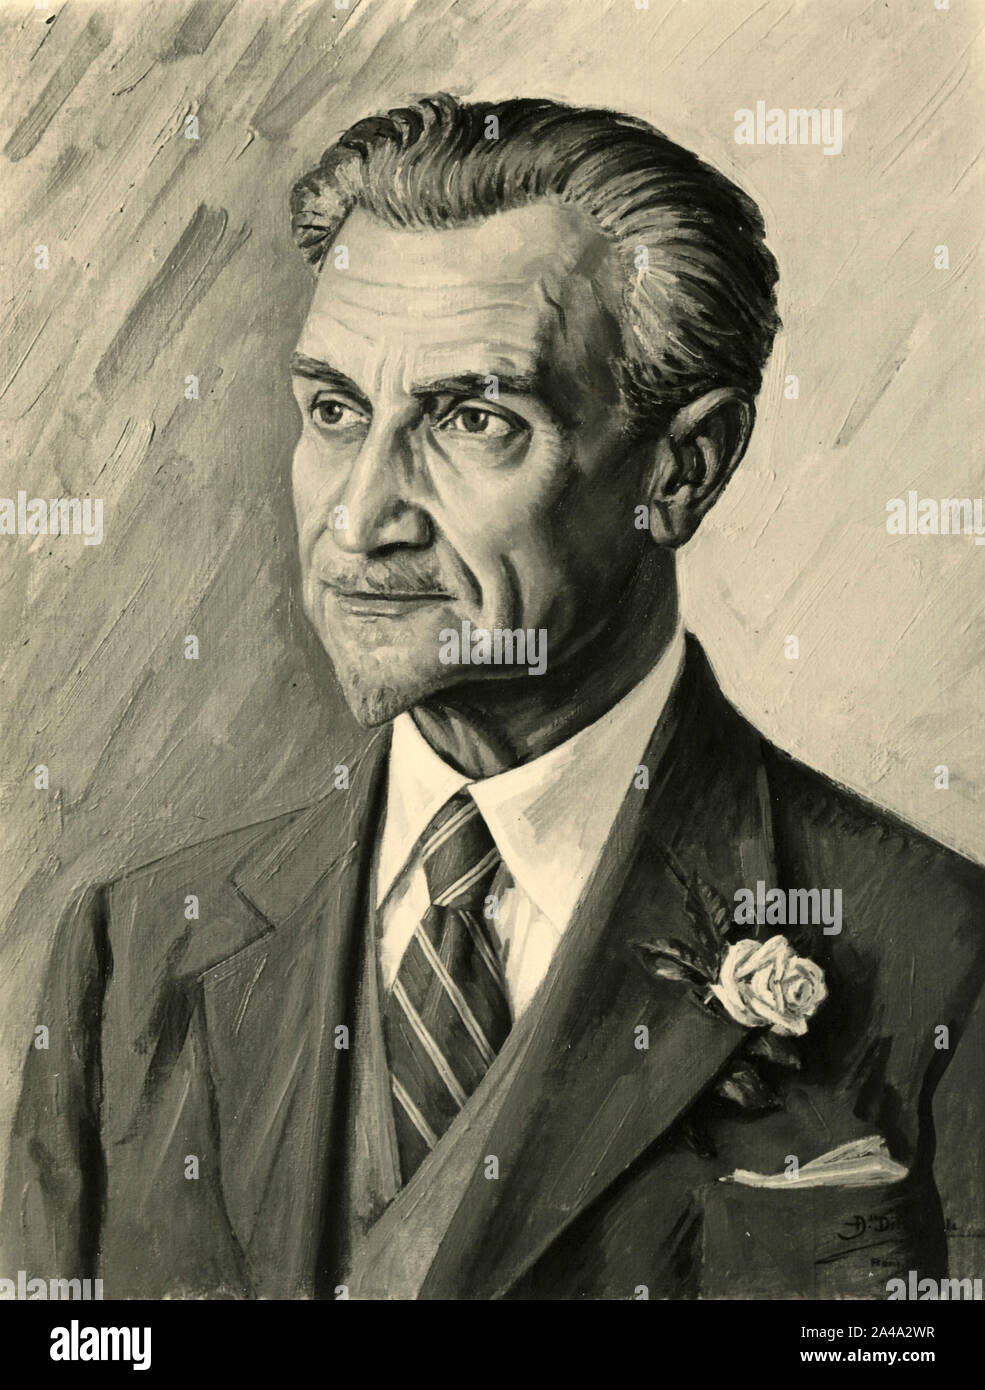 Portrait of unidentified man, painting by Italian painter Alfonso Di Pasquale, 1930s Stock Photo